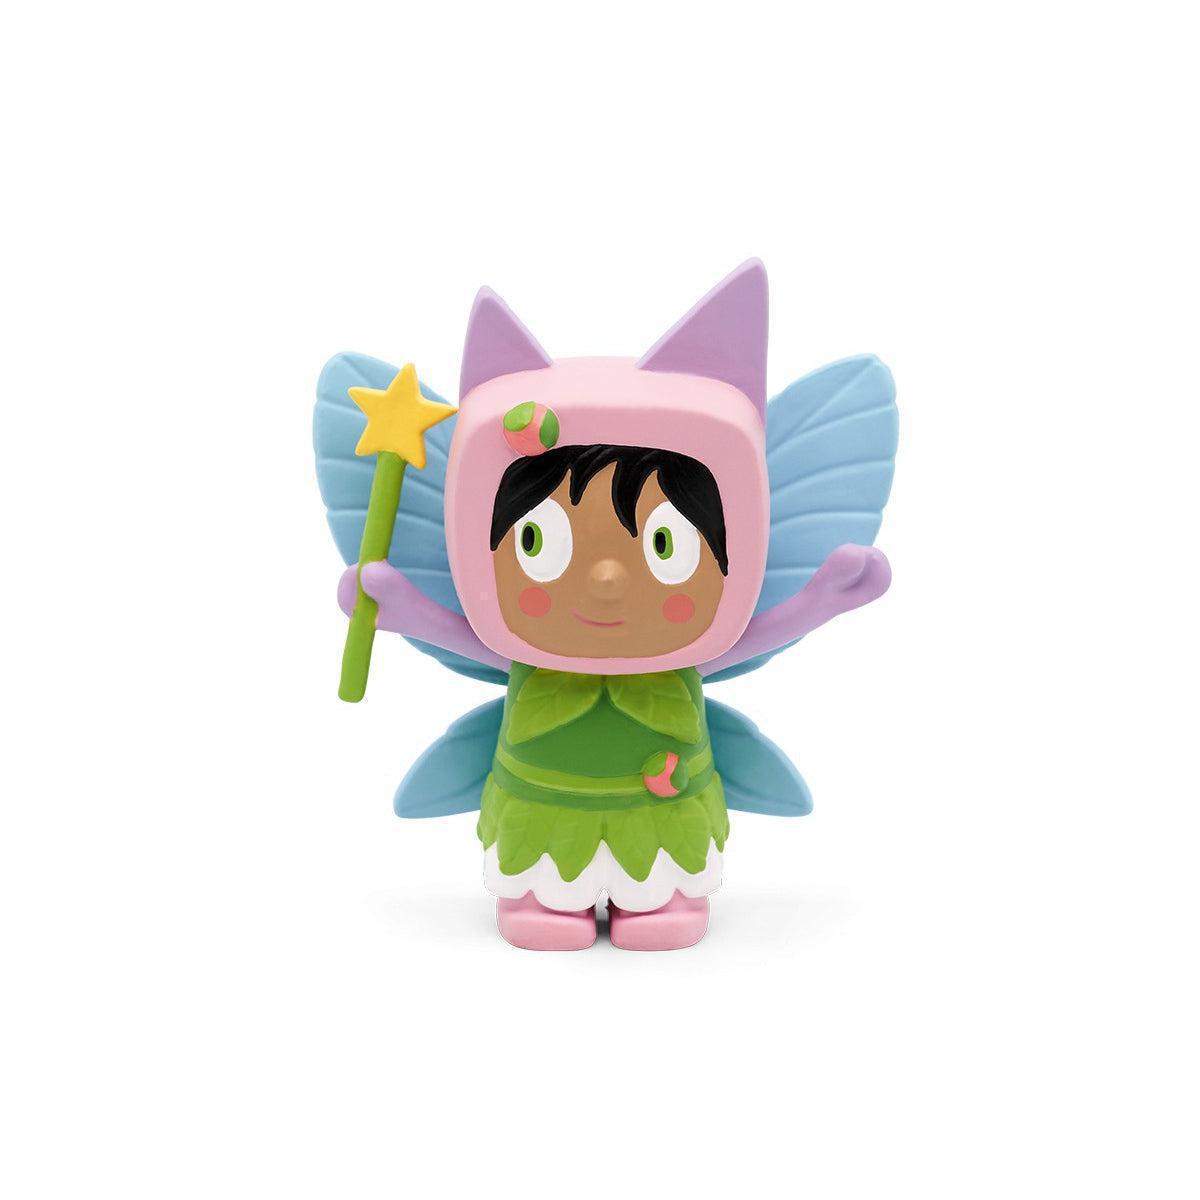 Creative Tonie Fairy - Audio Character for use with Toniebox Player with Space for up to 90 Minutes of Customisable Content